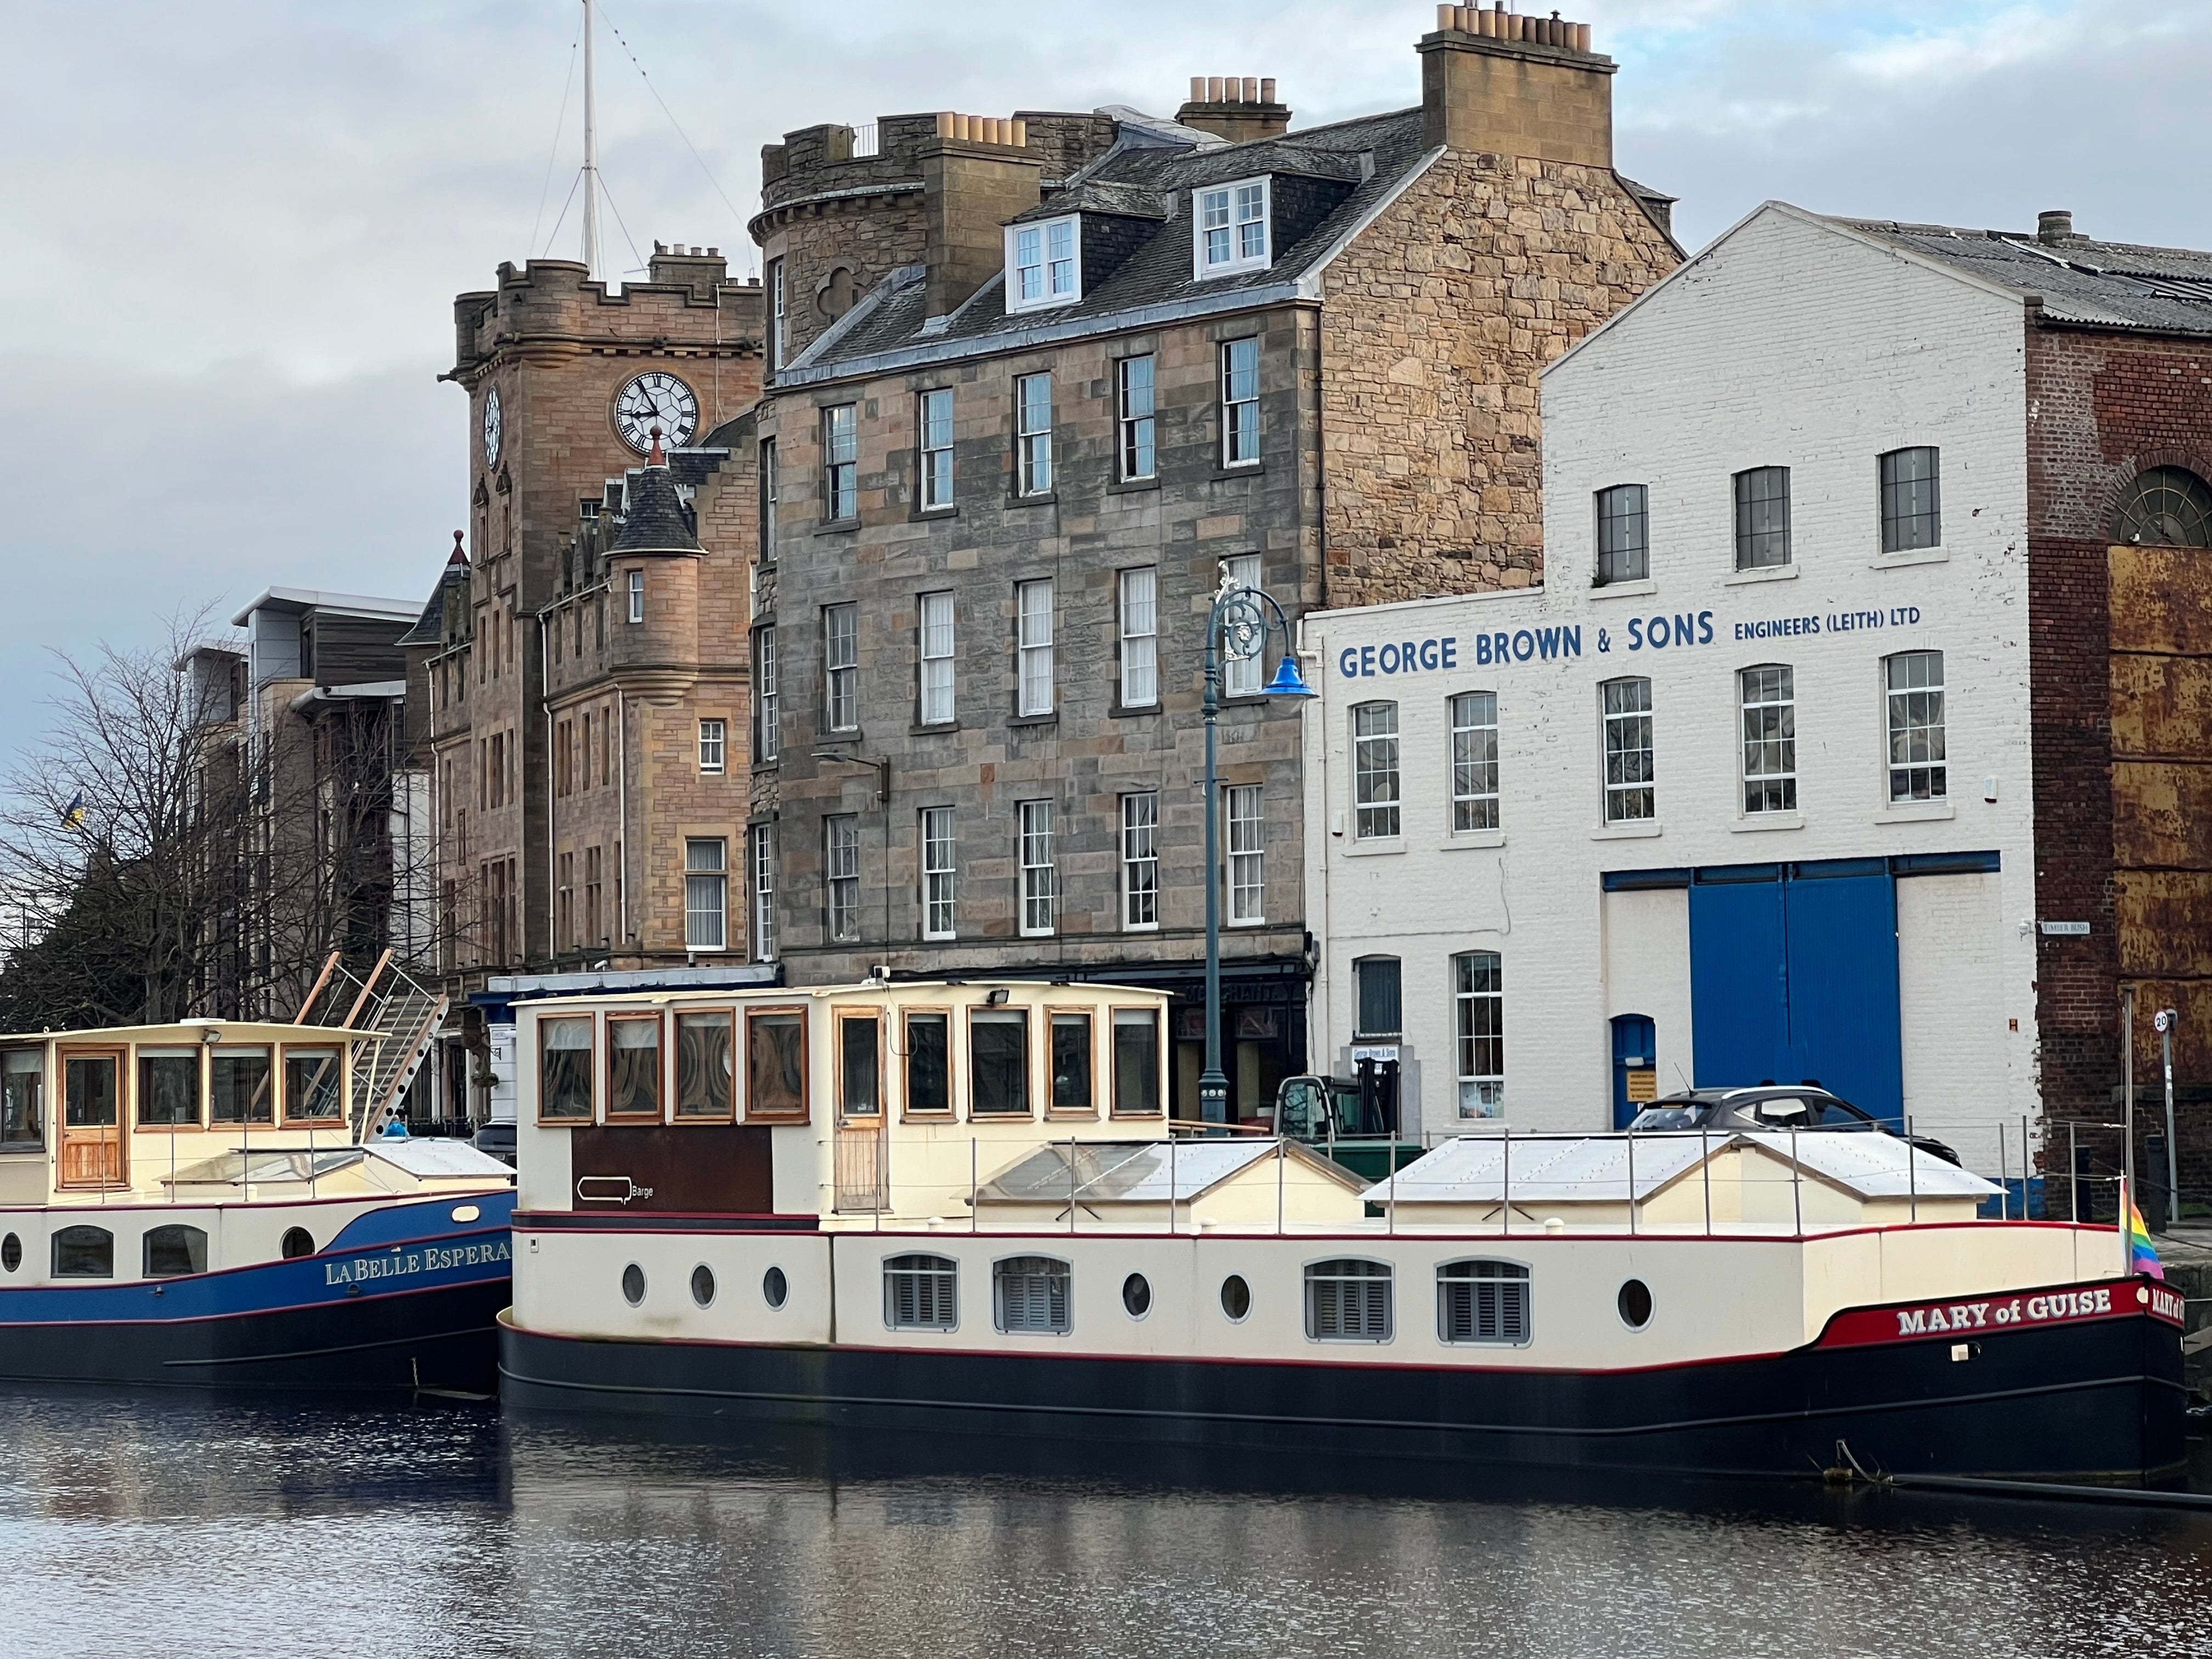 Leith has cleaned up its act